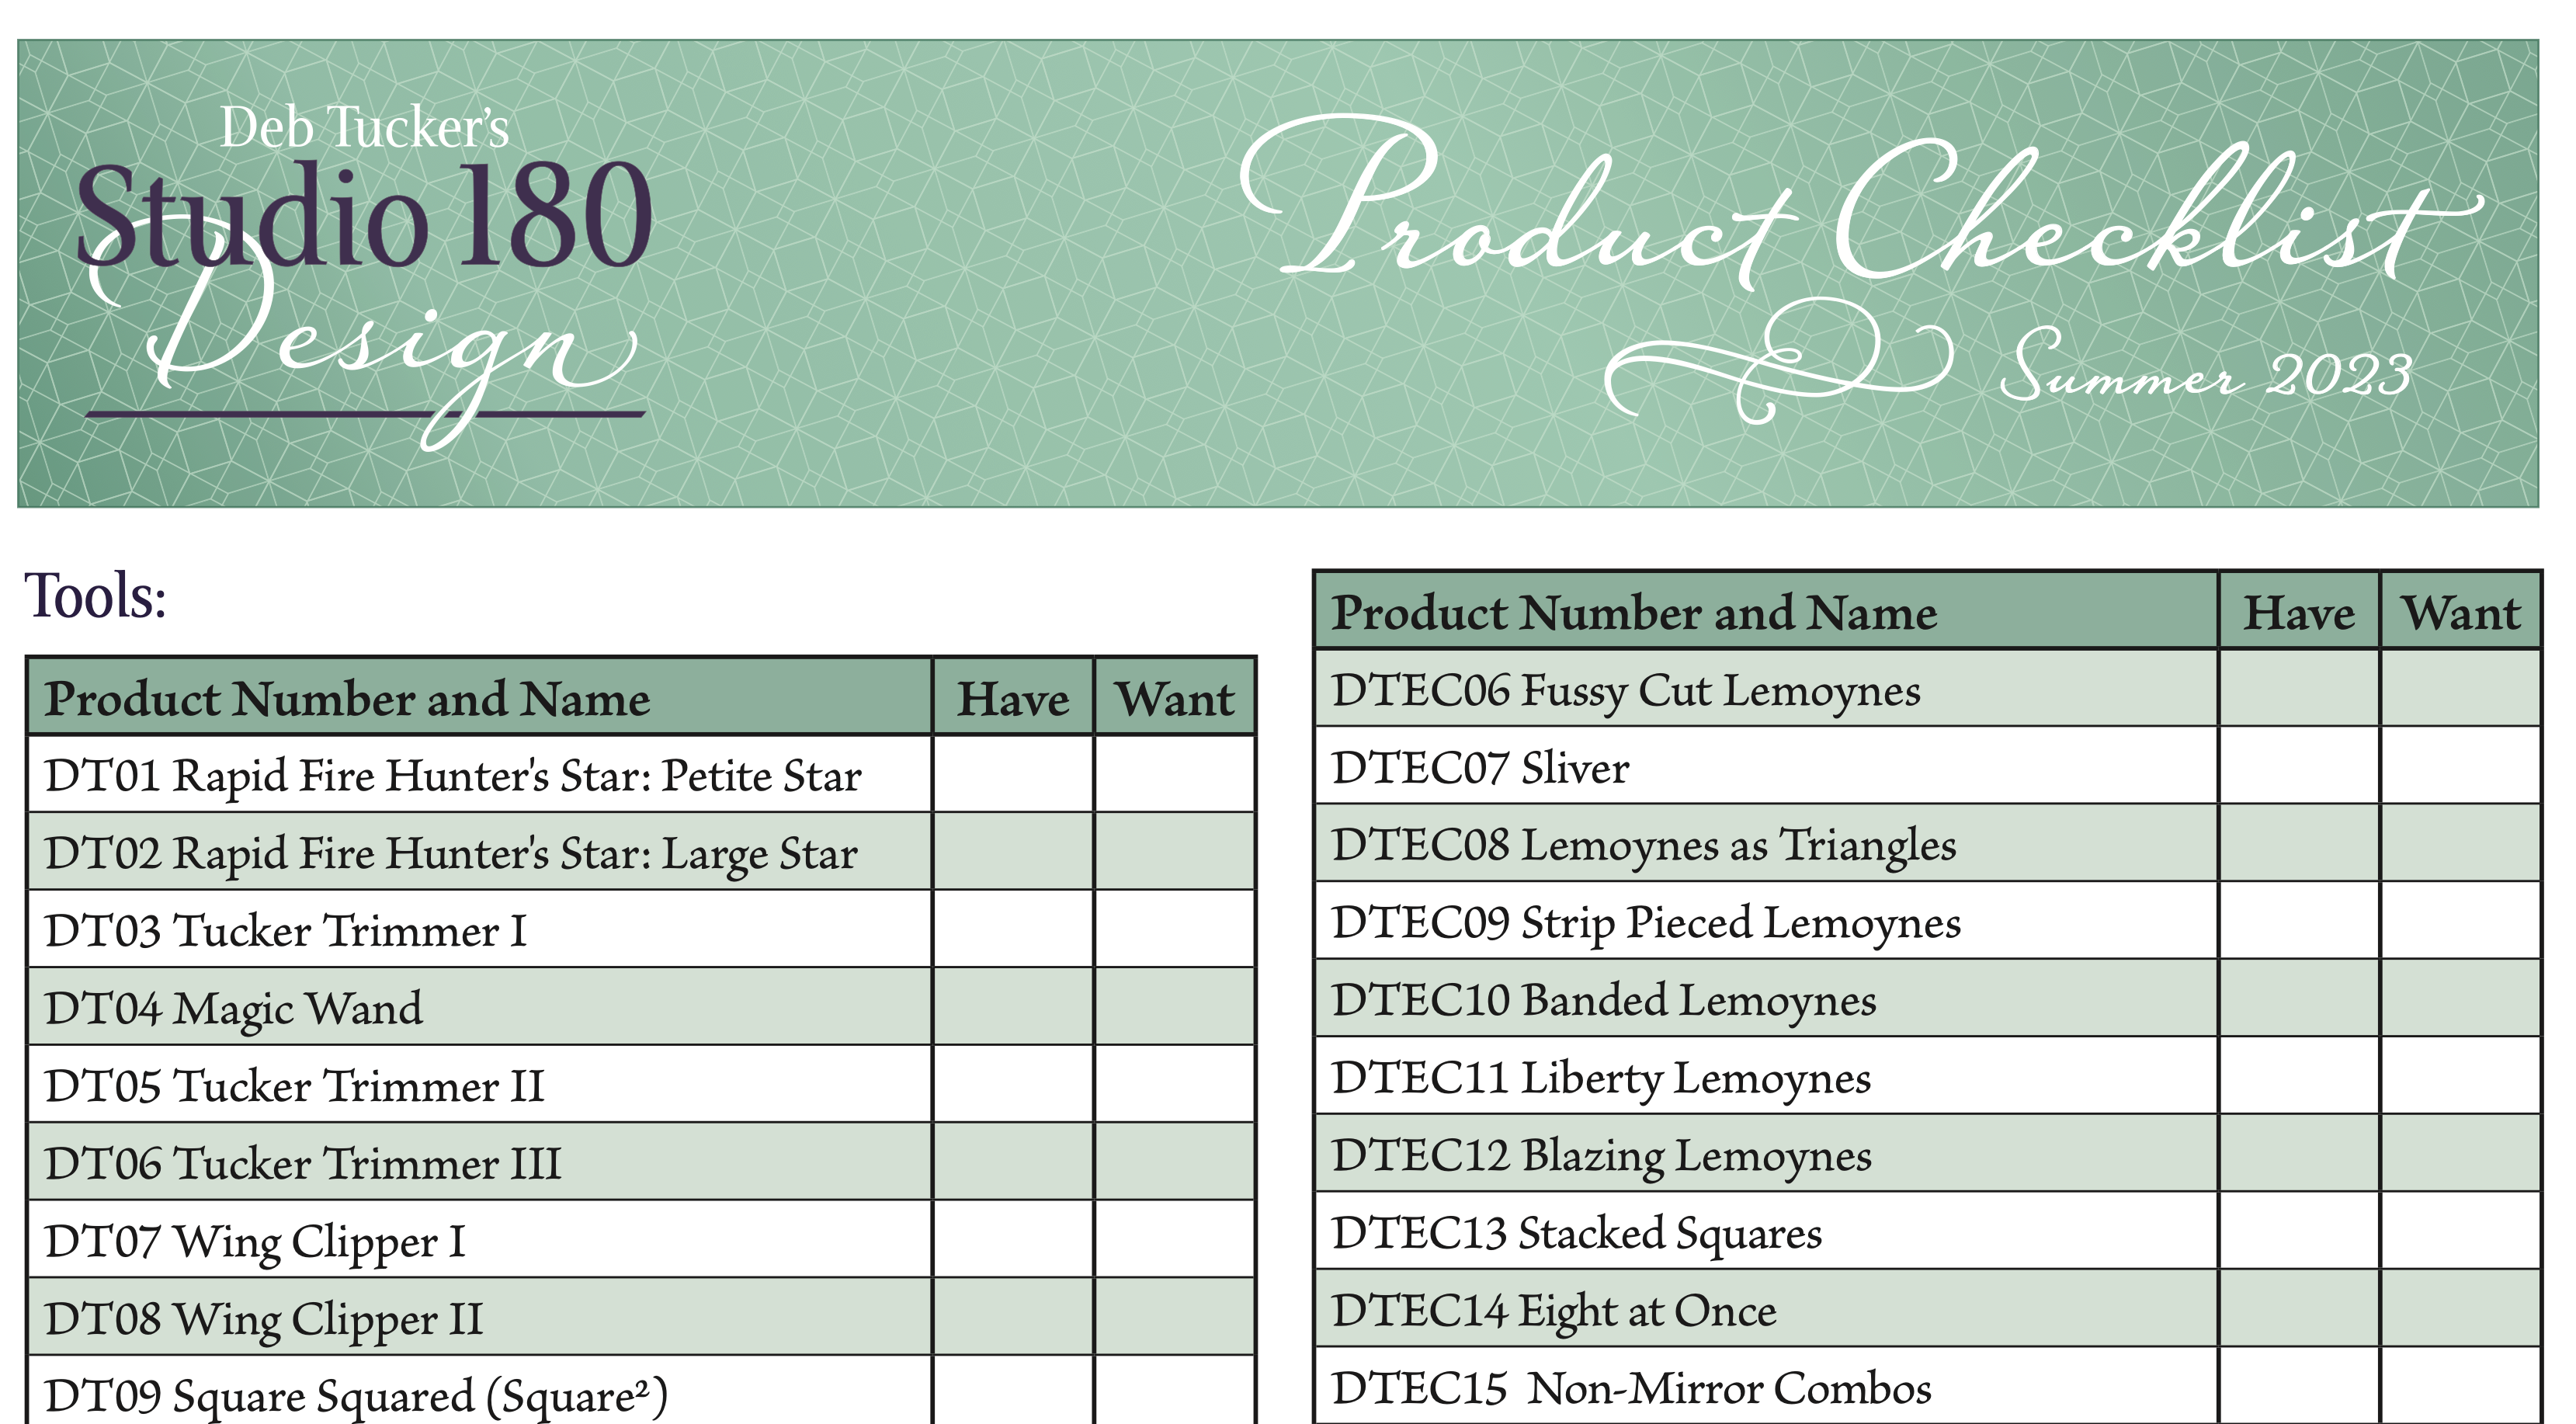 Have It - Want It Inventory Checklist  - FREE DOWNLOAD